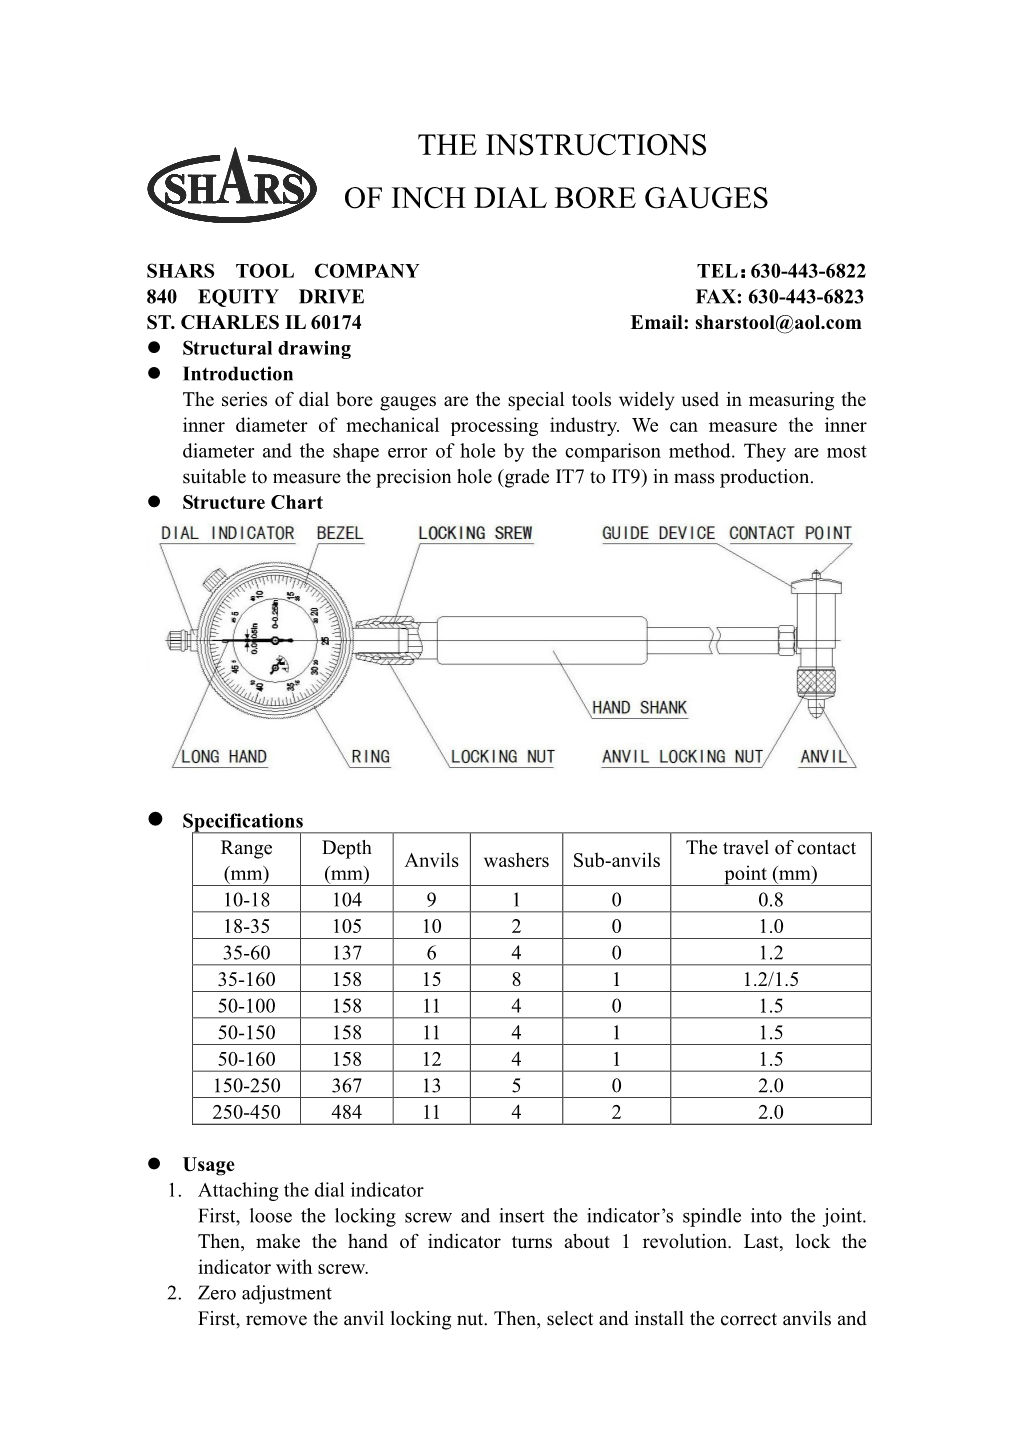 The Instructions of Inch Dial Bore Gauges